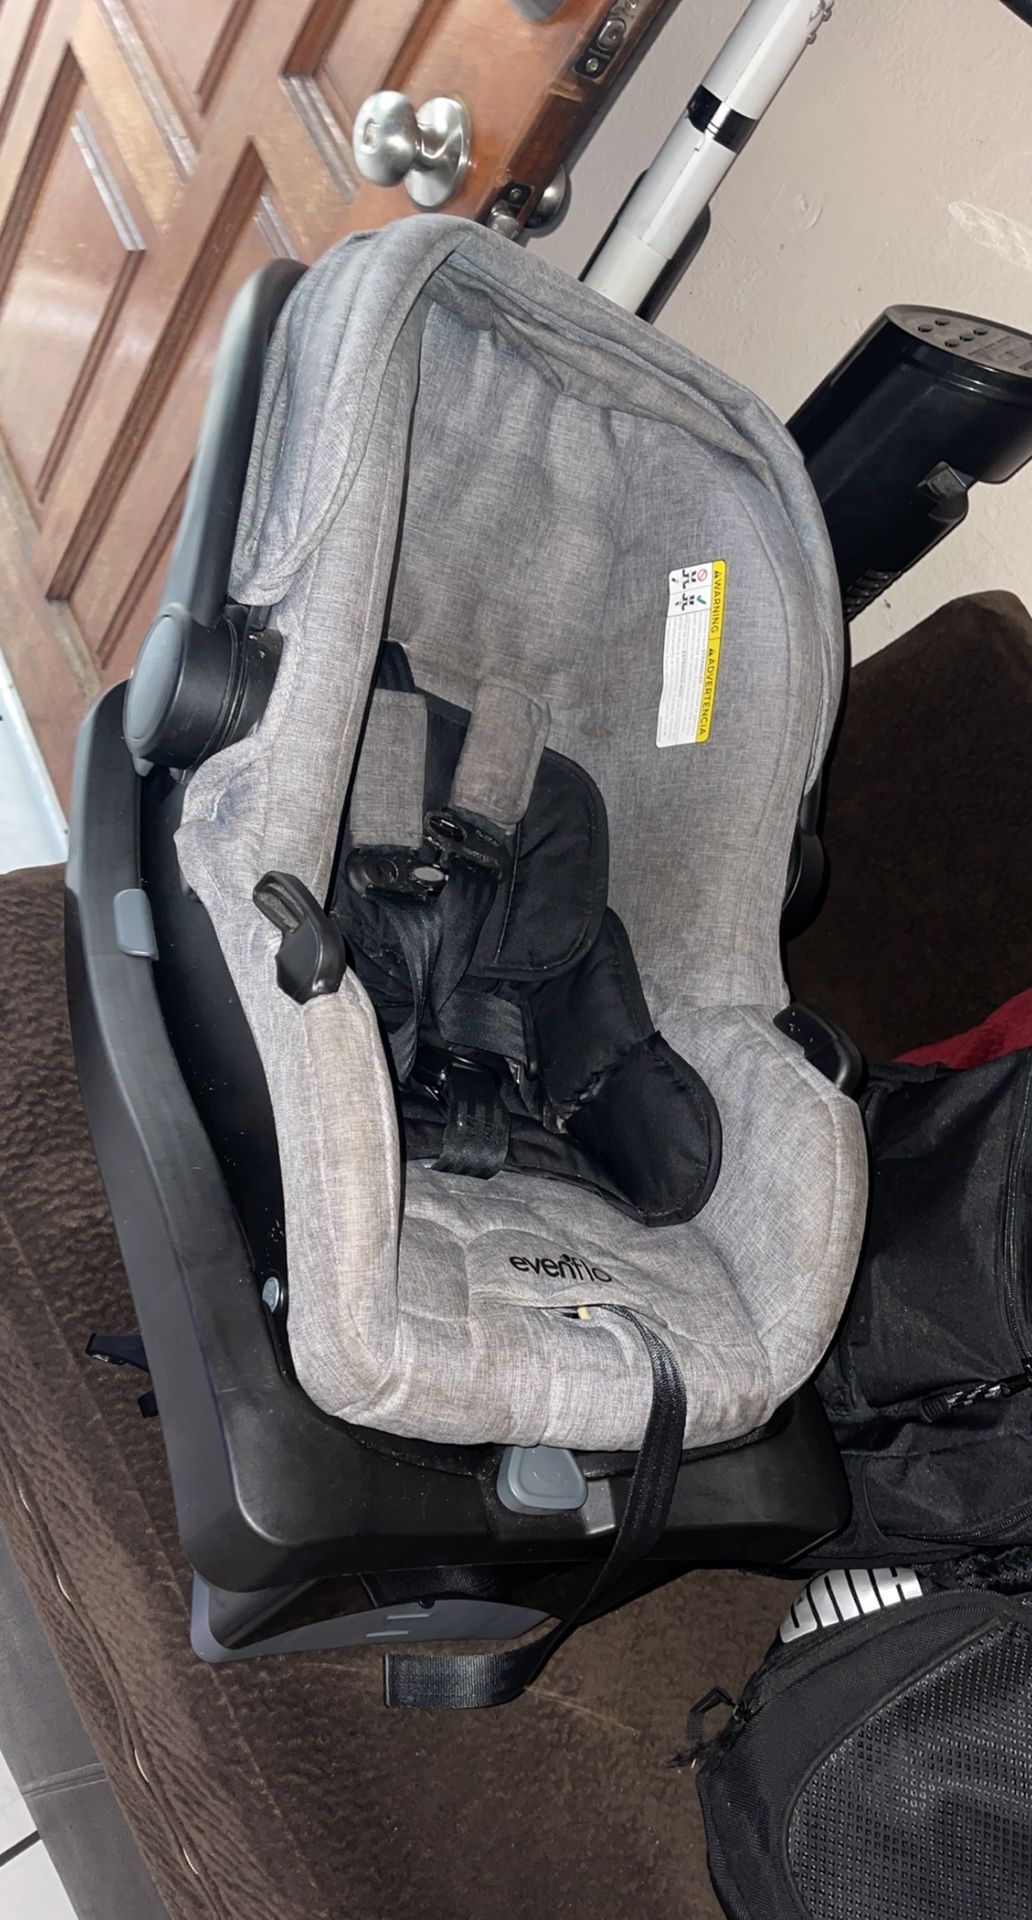 Gray Carseat And Stroller Good Conditions $65 Dllrs Or Best Offer 